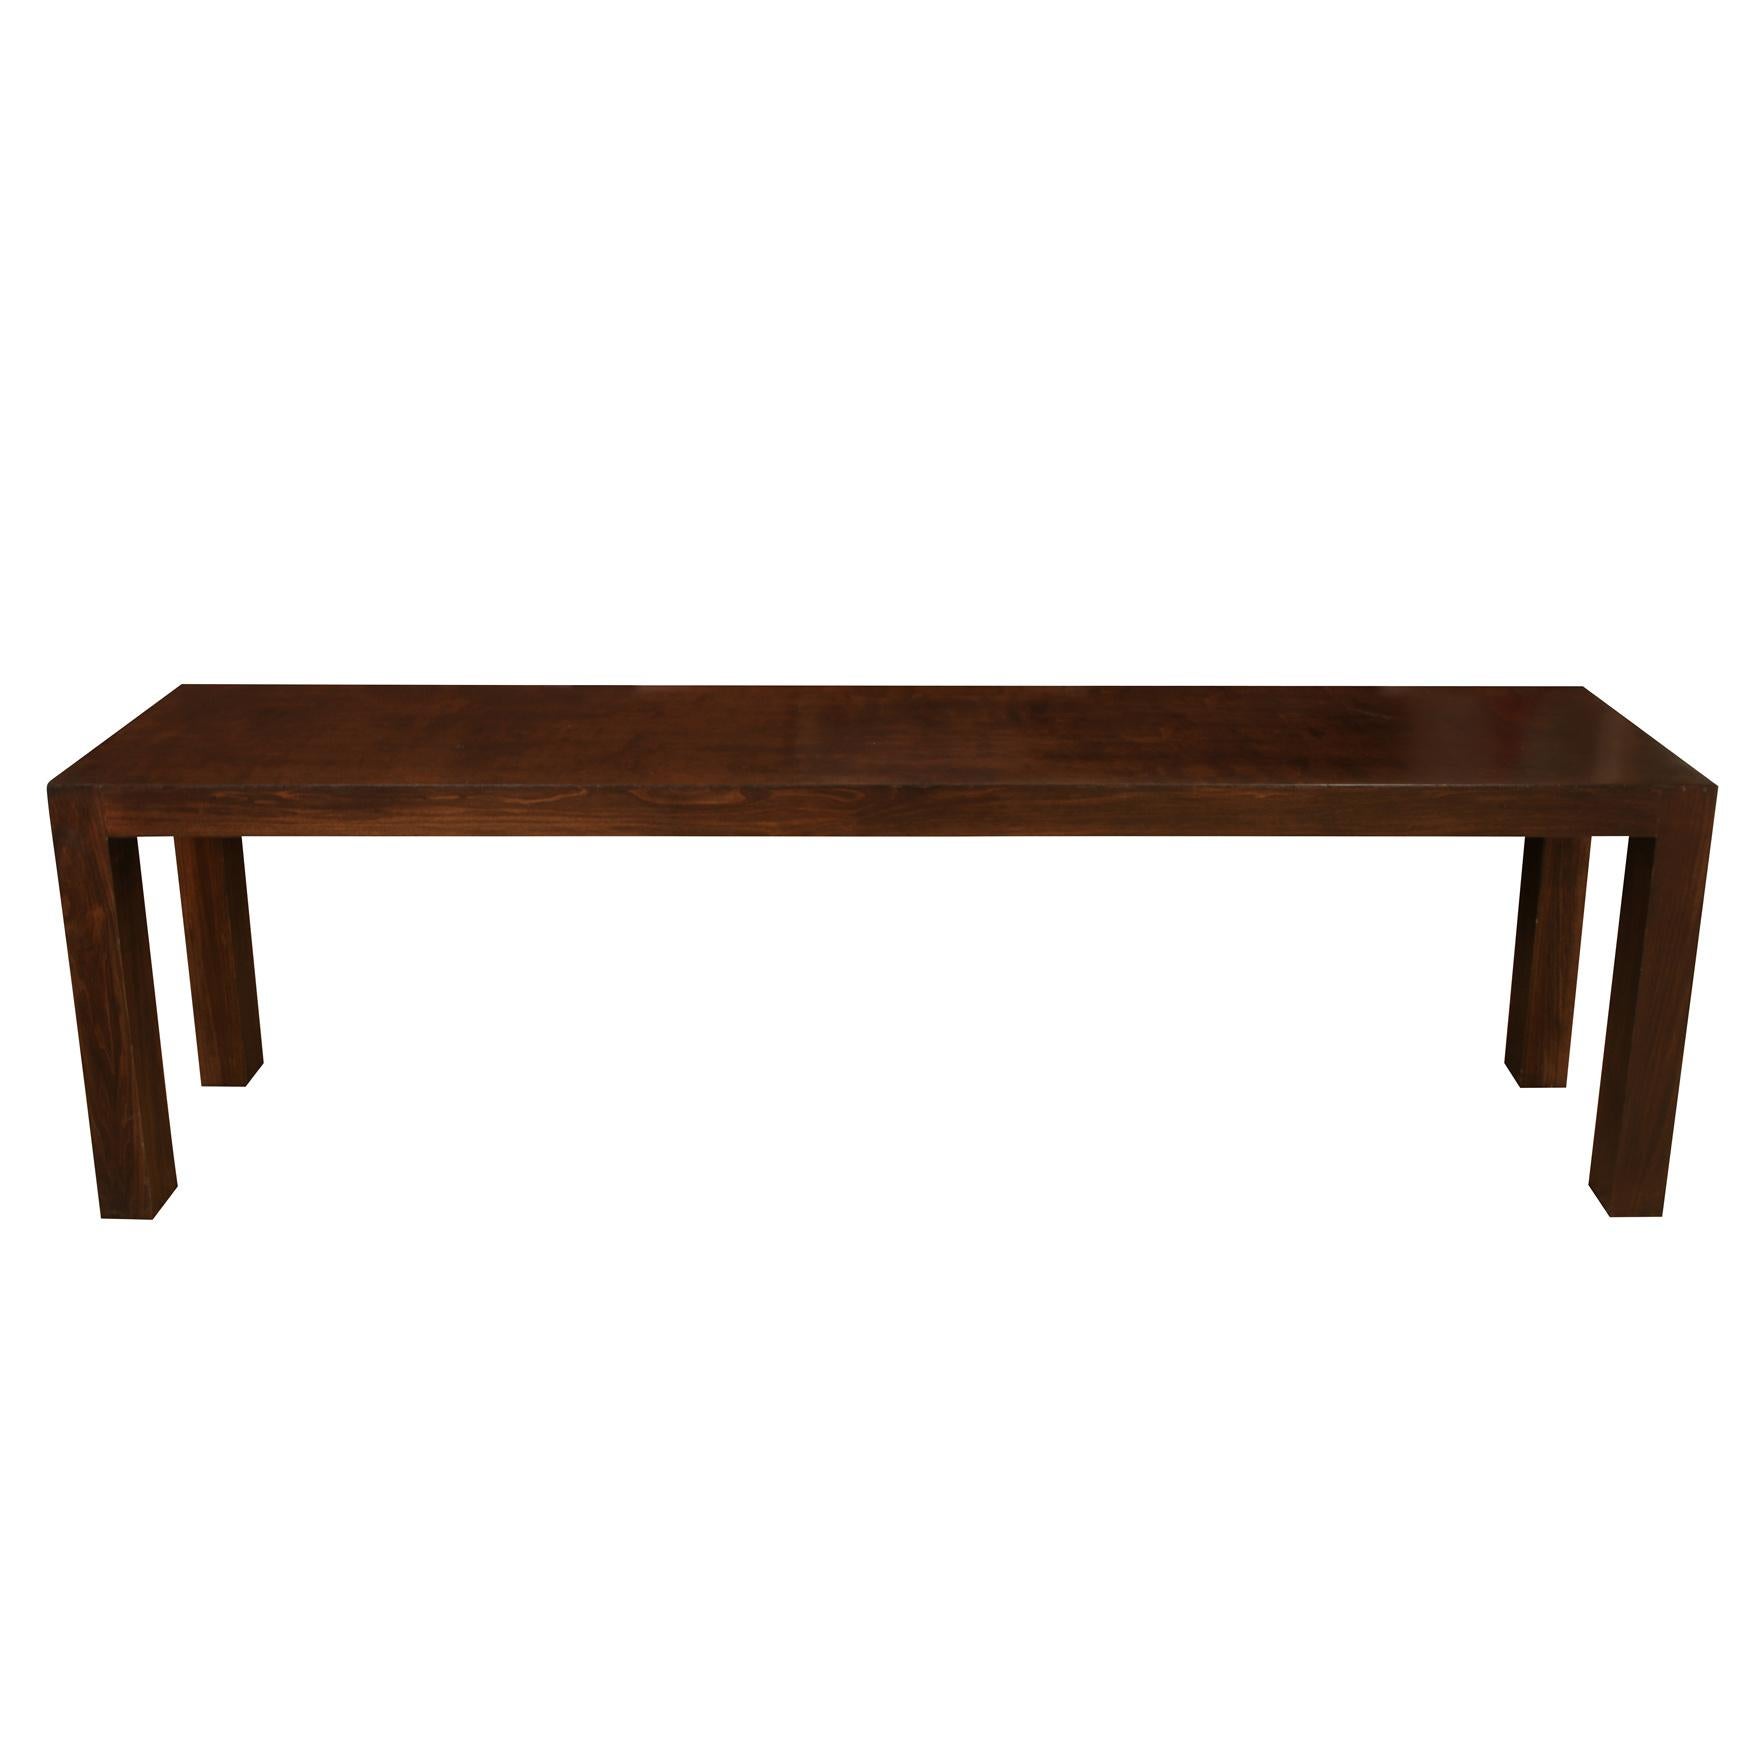 Extra long stained walnut parsons style console table.